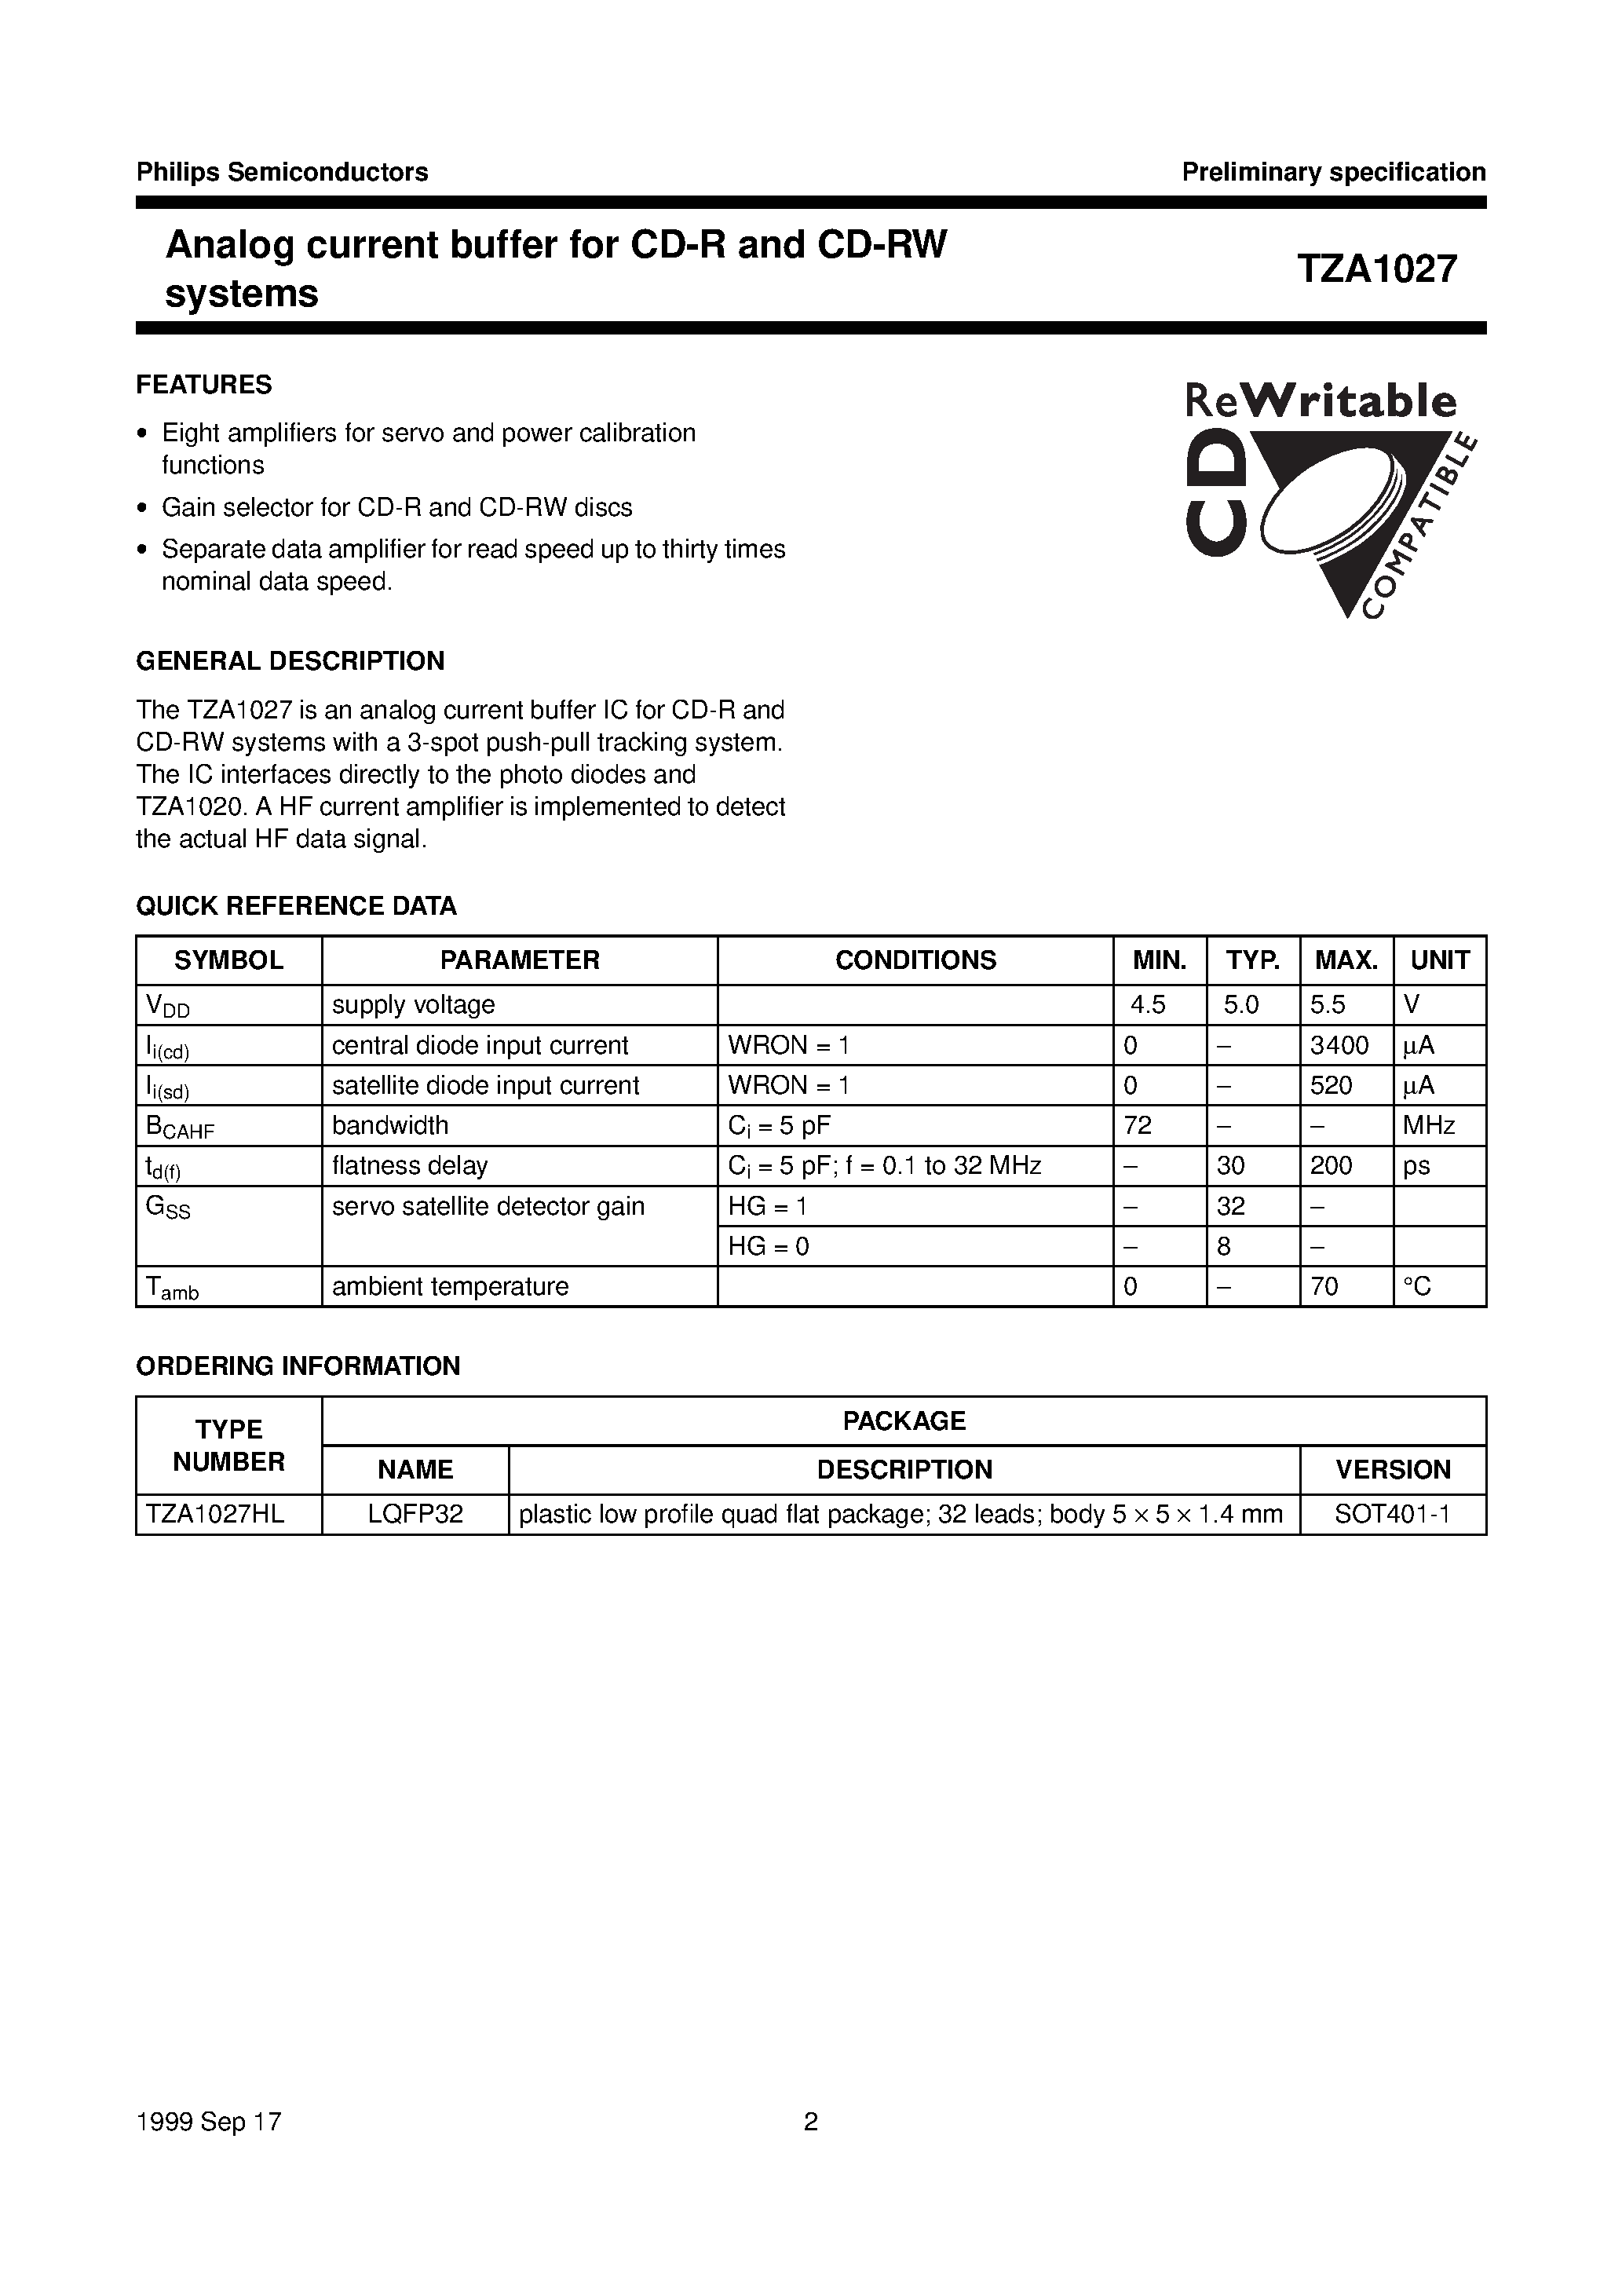 Datasheet TZA1027HL - Analog current buffer for CD-R and CD-RW systems page 2